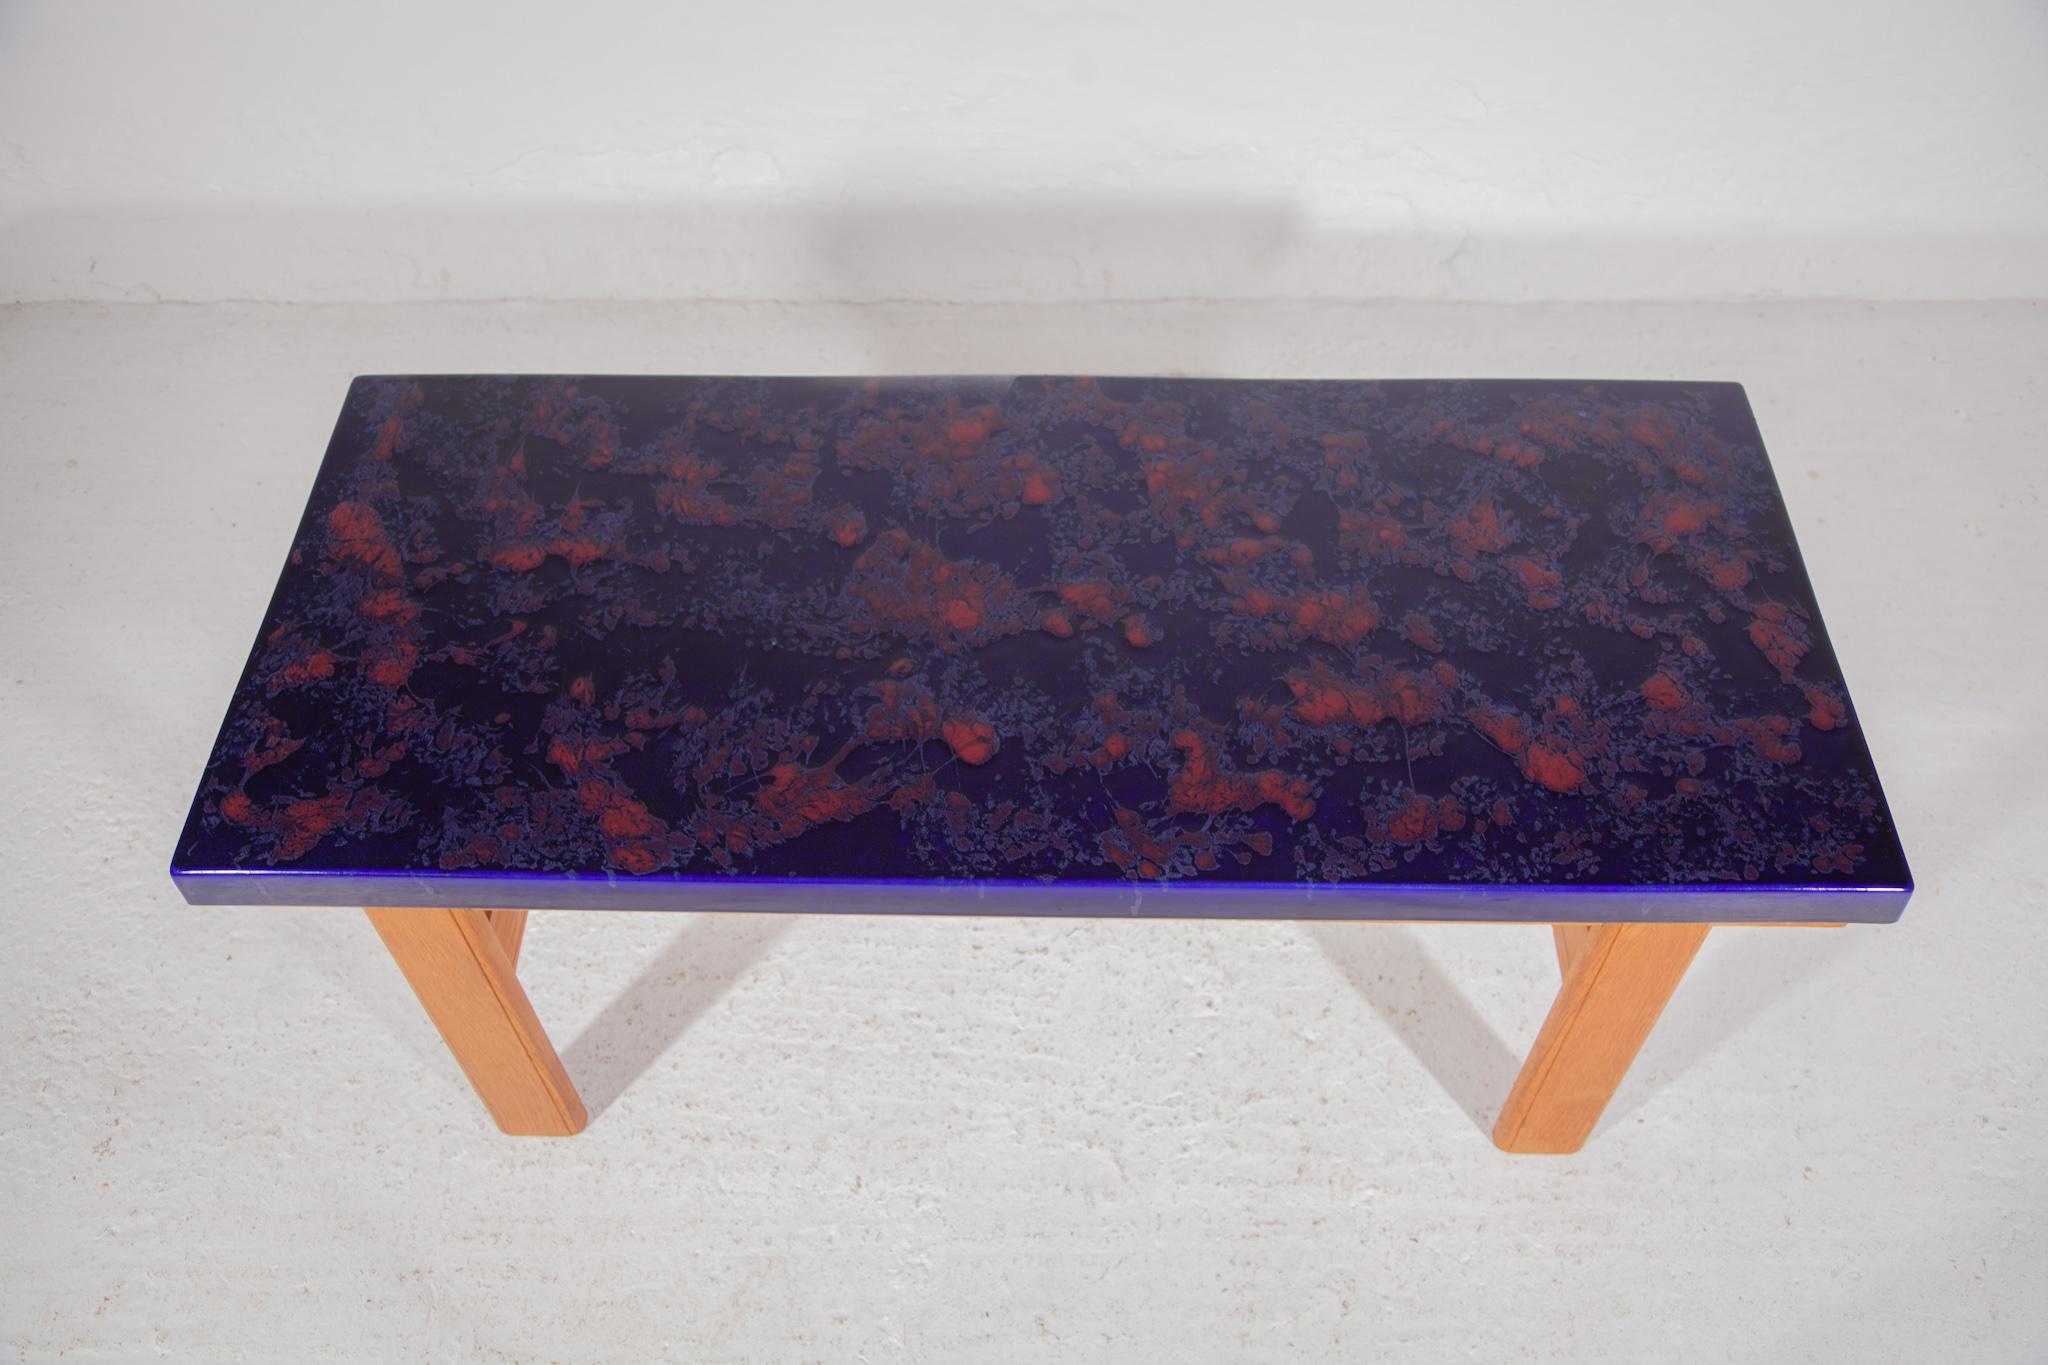 Large Rectangular Top Ceramic Blue and Orange Tile Coffee Table, 1970s For Sale 1